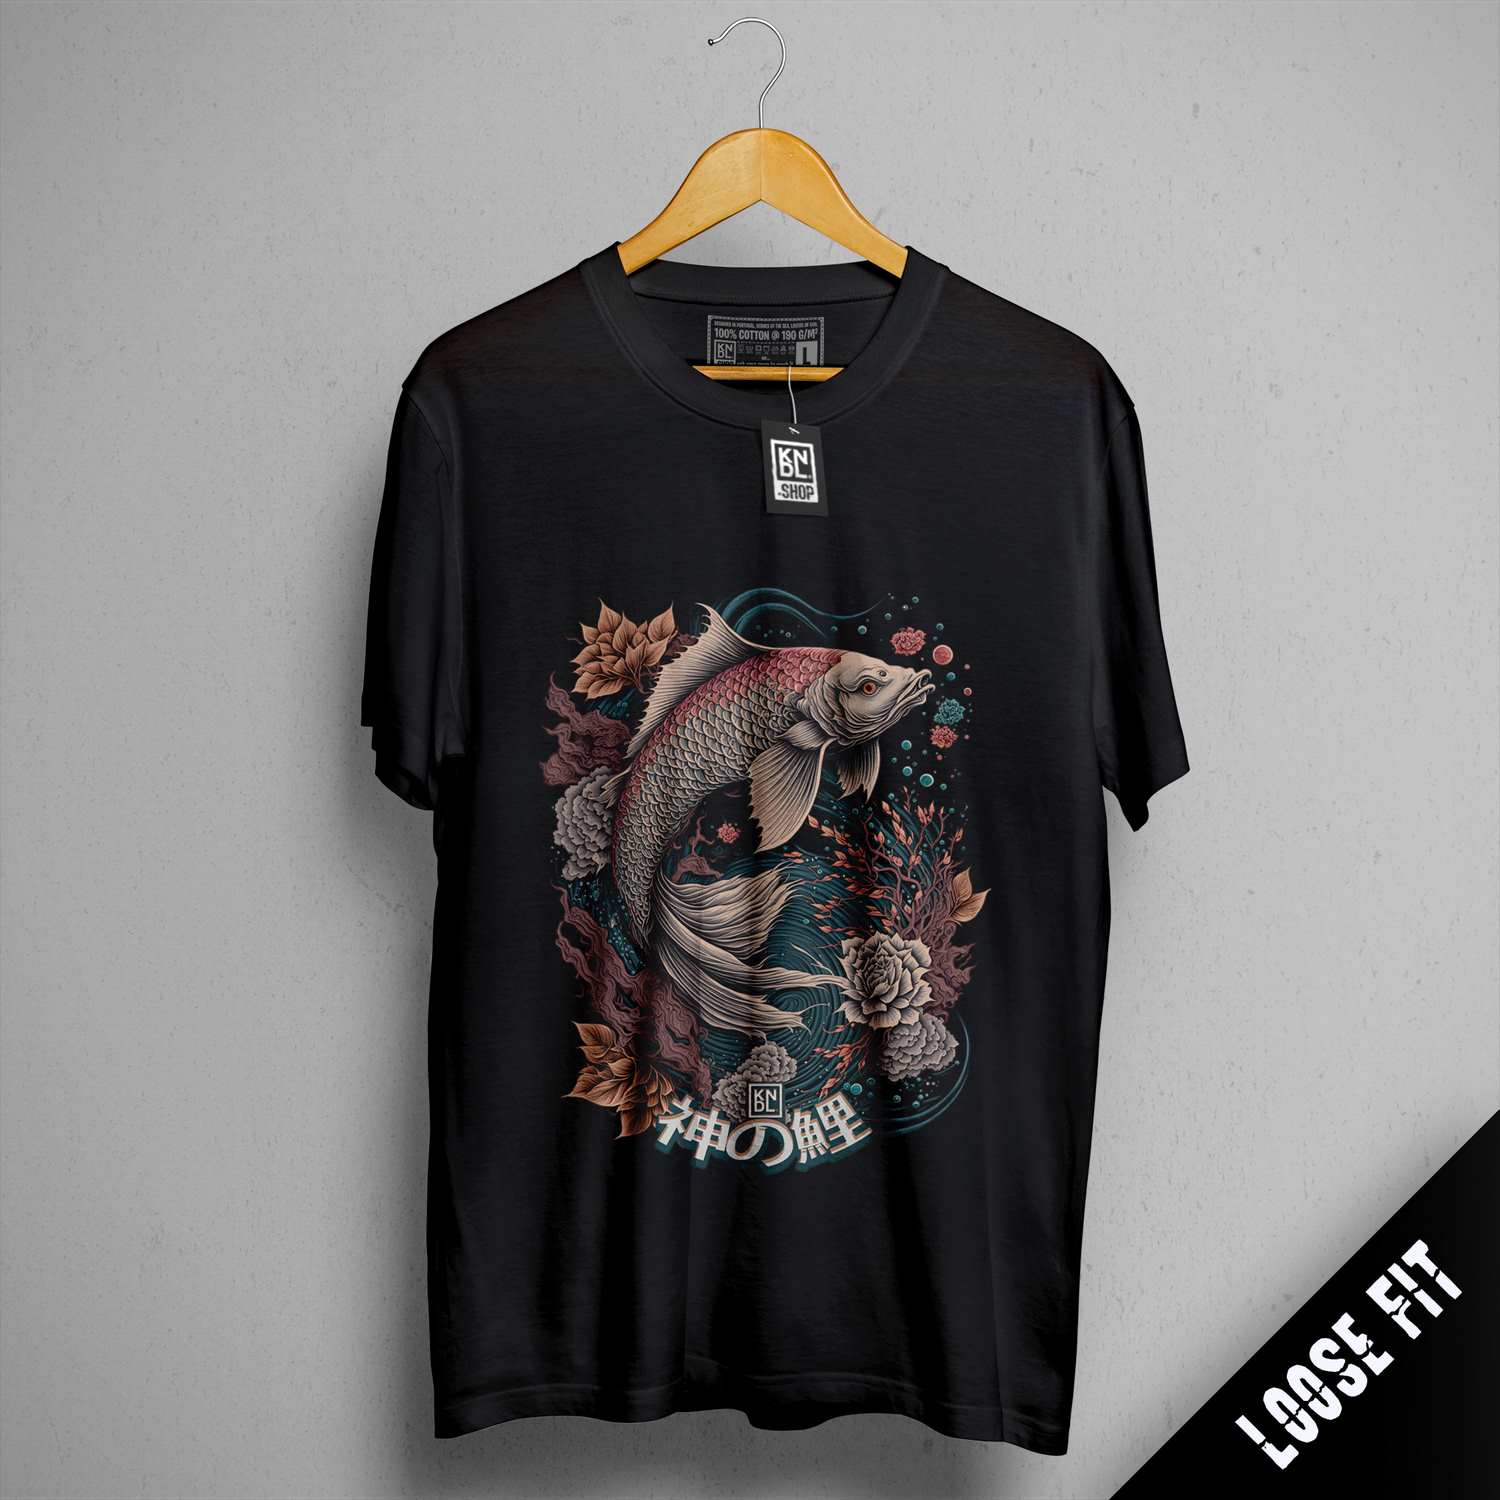 a black t - shirt with a koi fish on it